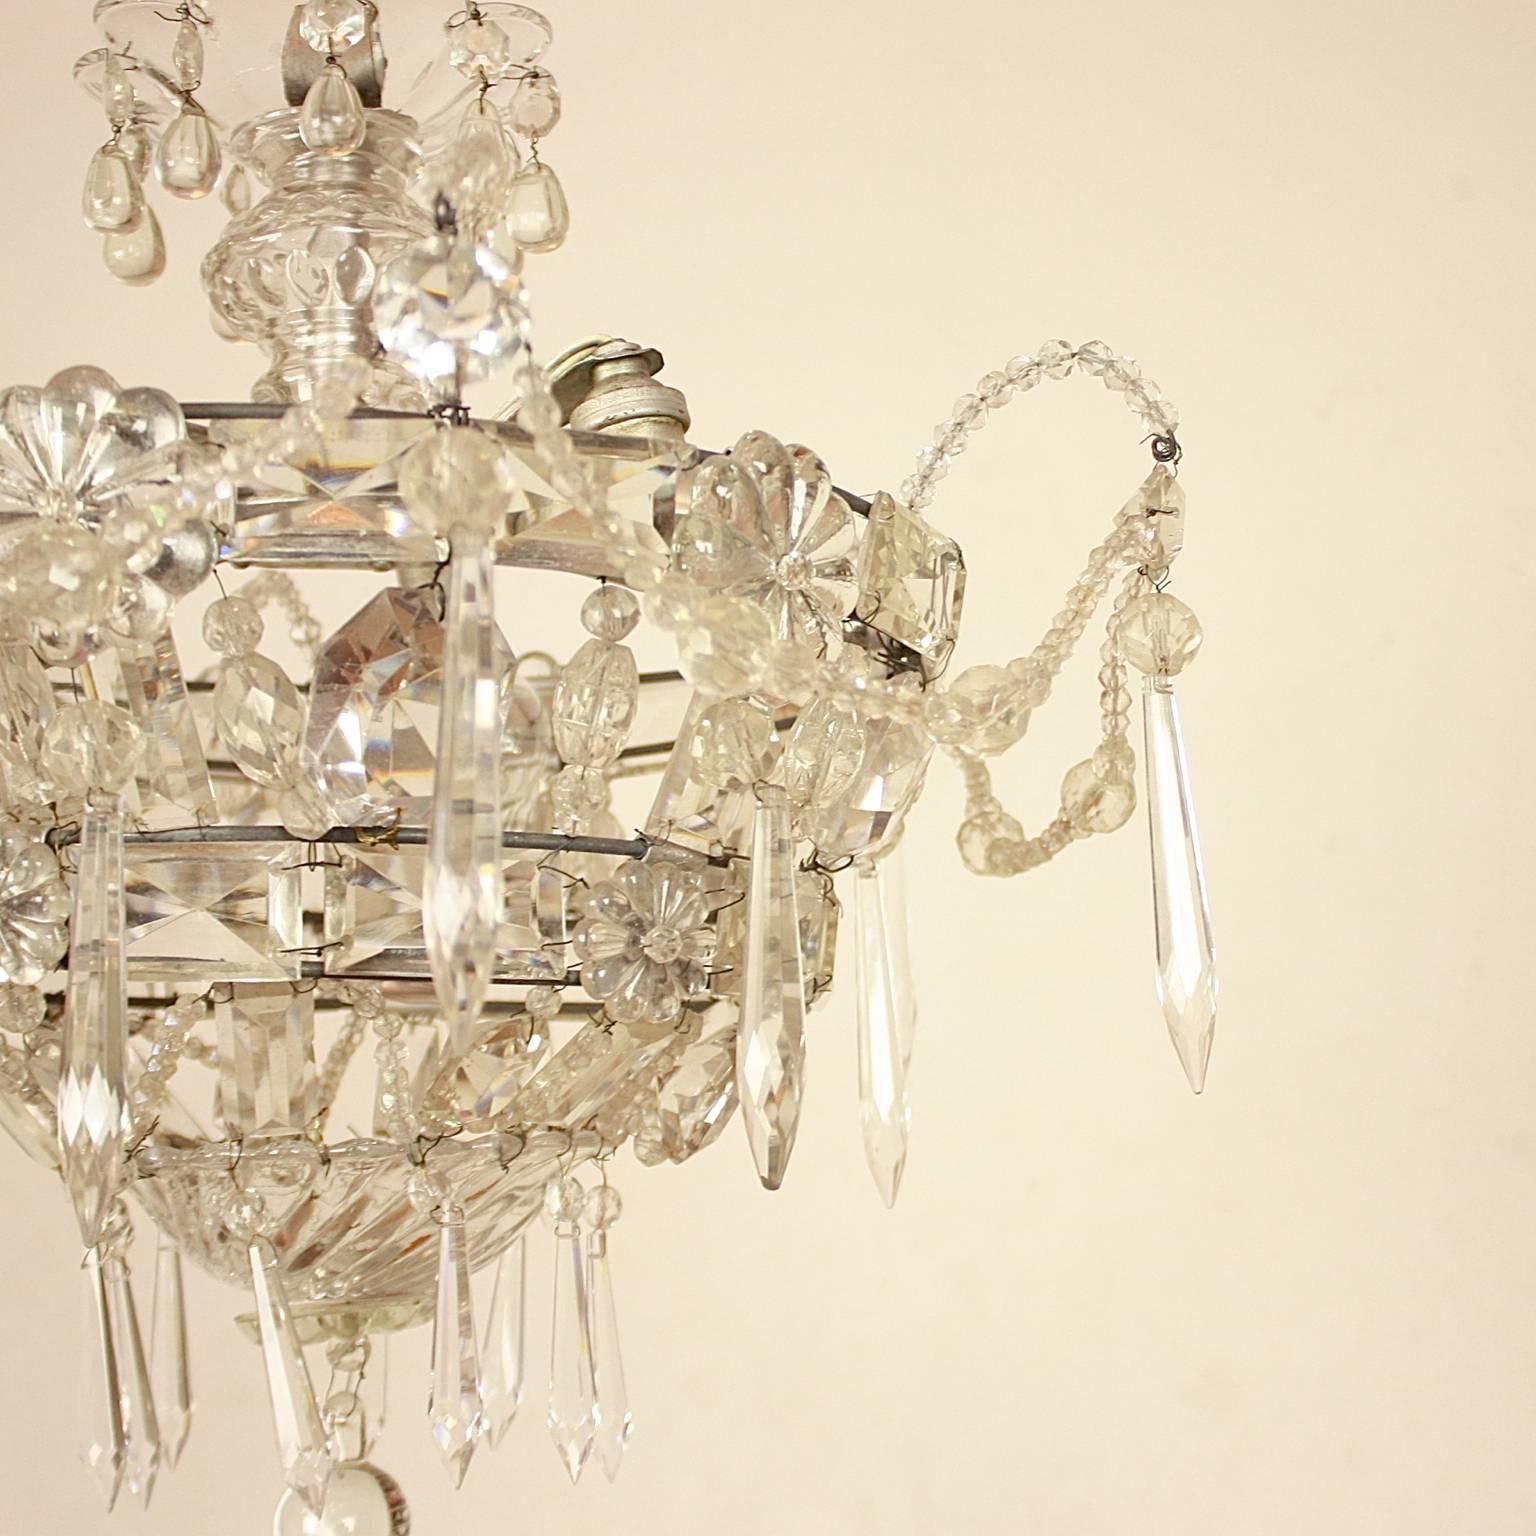 Unique circular ceiling lamp or plafonière. From a ceiling glass rosette a two tier basket-formed corpus is hang with cut crystal prism and terminating in a solid glass ball. The whole beautifully adorned with cut crystal drops, prisms, flower